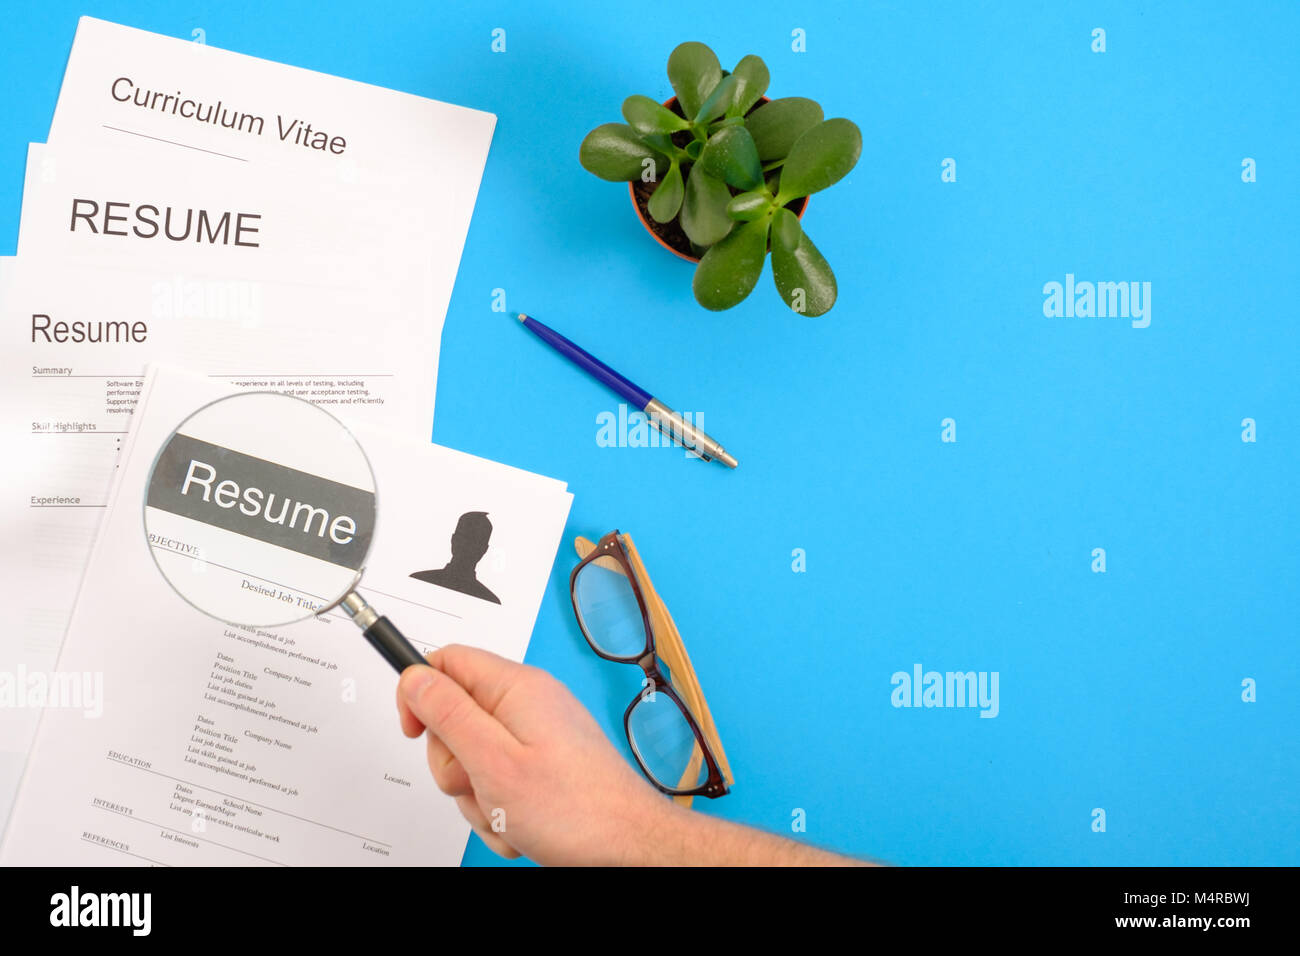 Job search and interview resume recruitment application concept Stock Photo